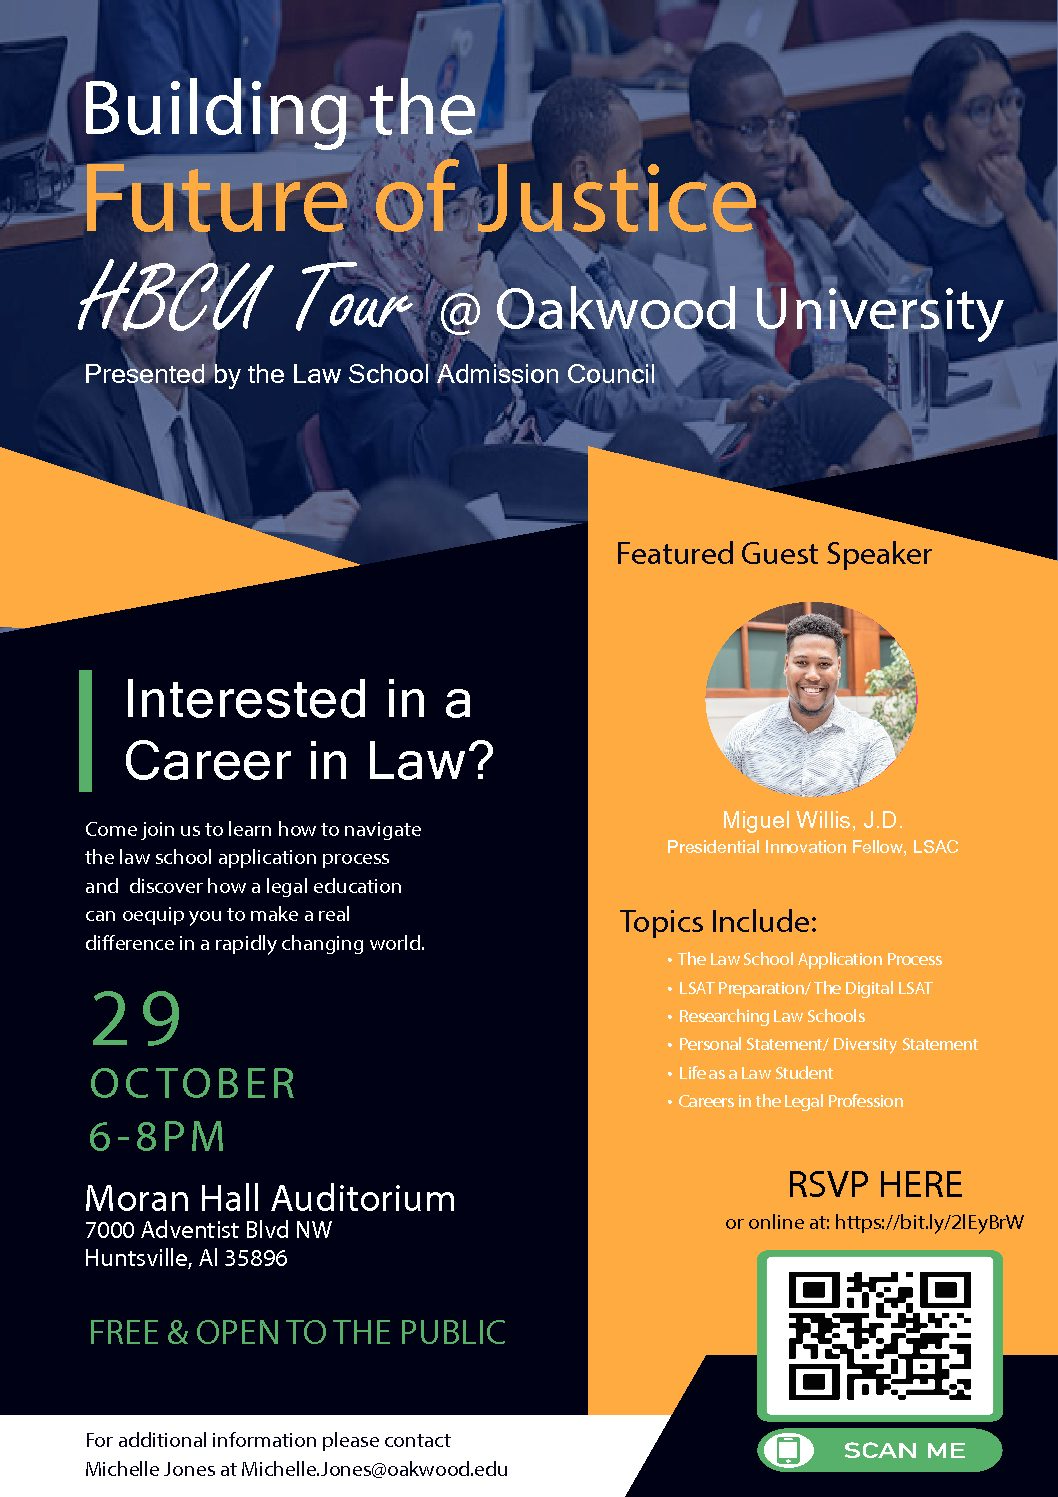 Building the Future of Justice HBCU Tour at Oakwood University